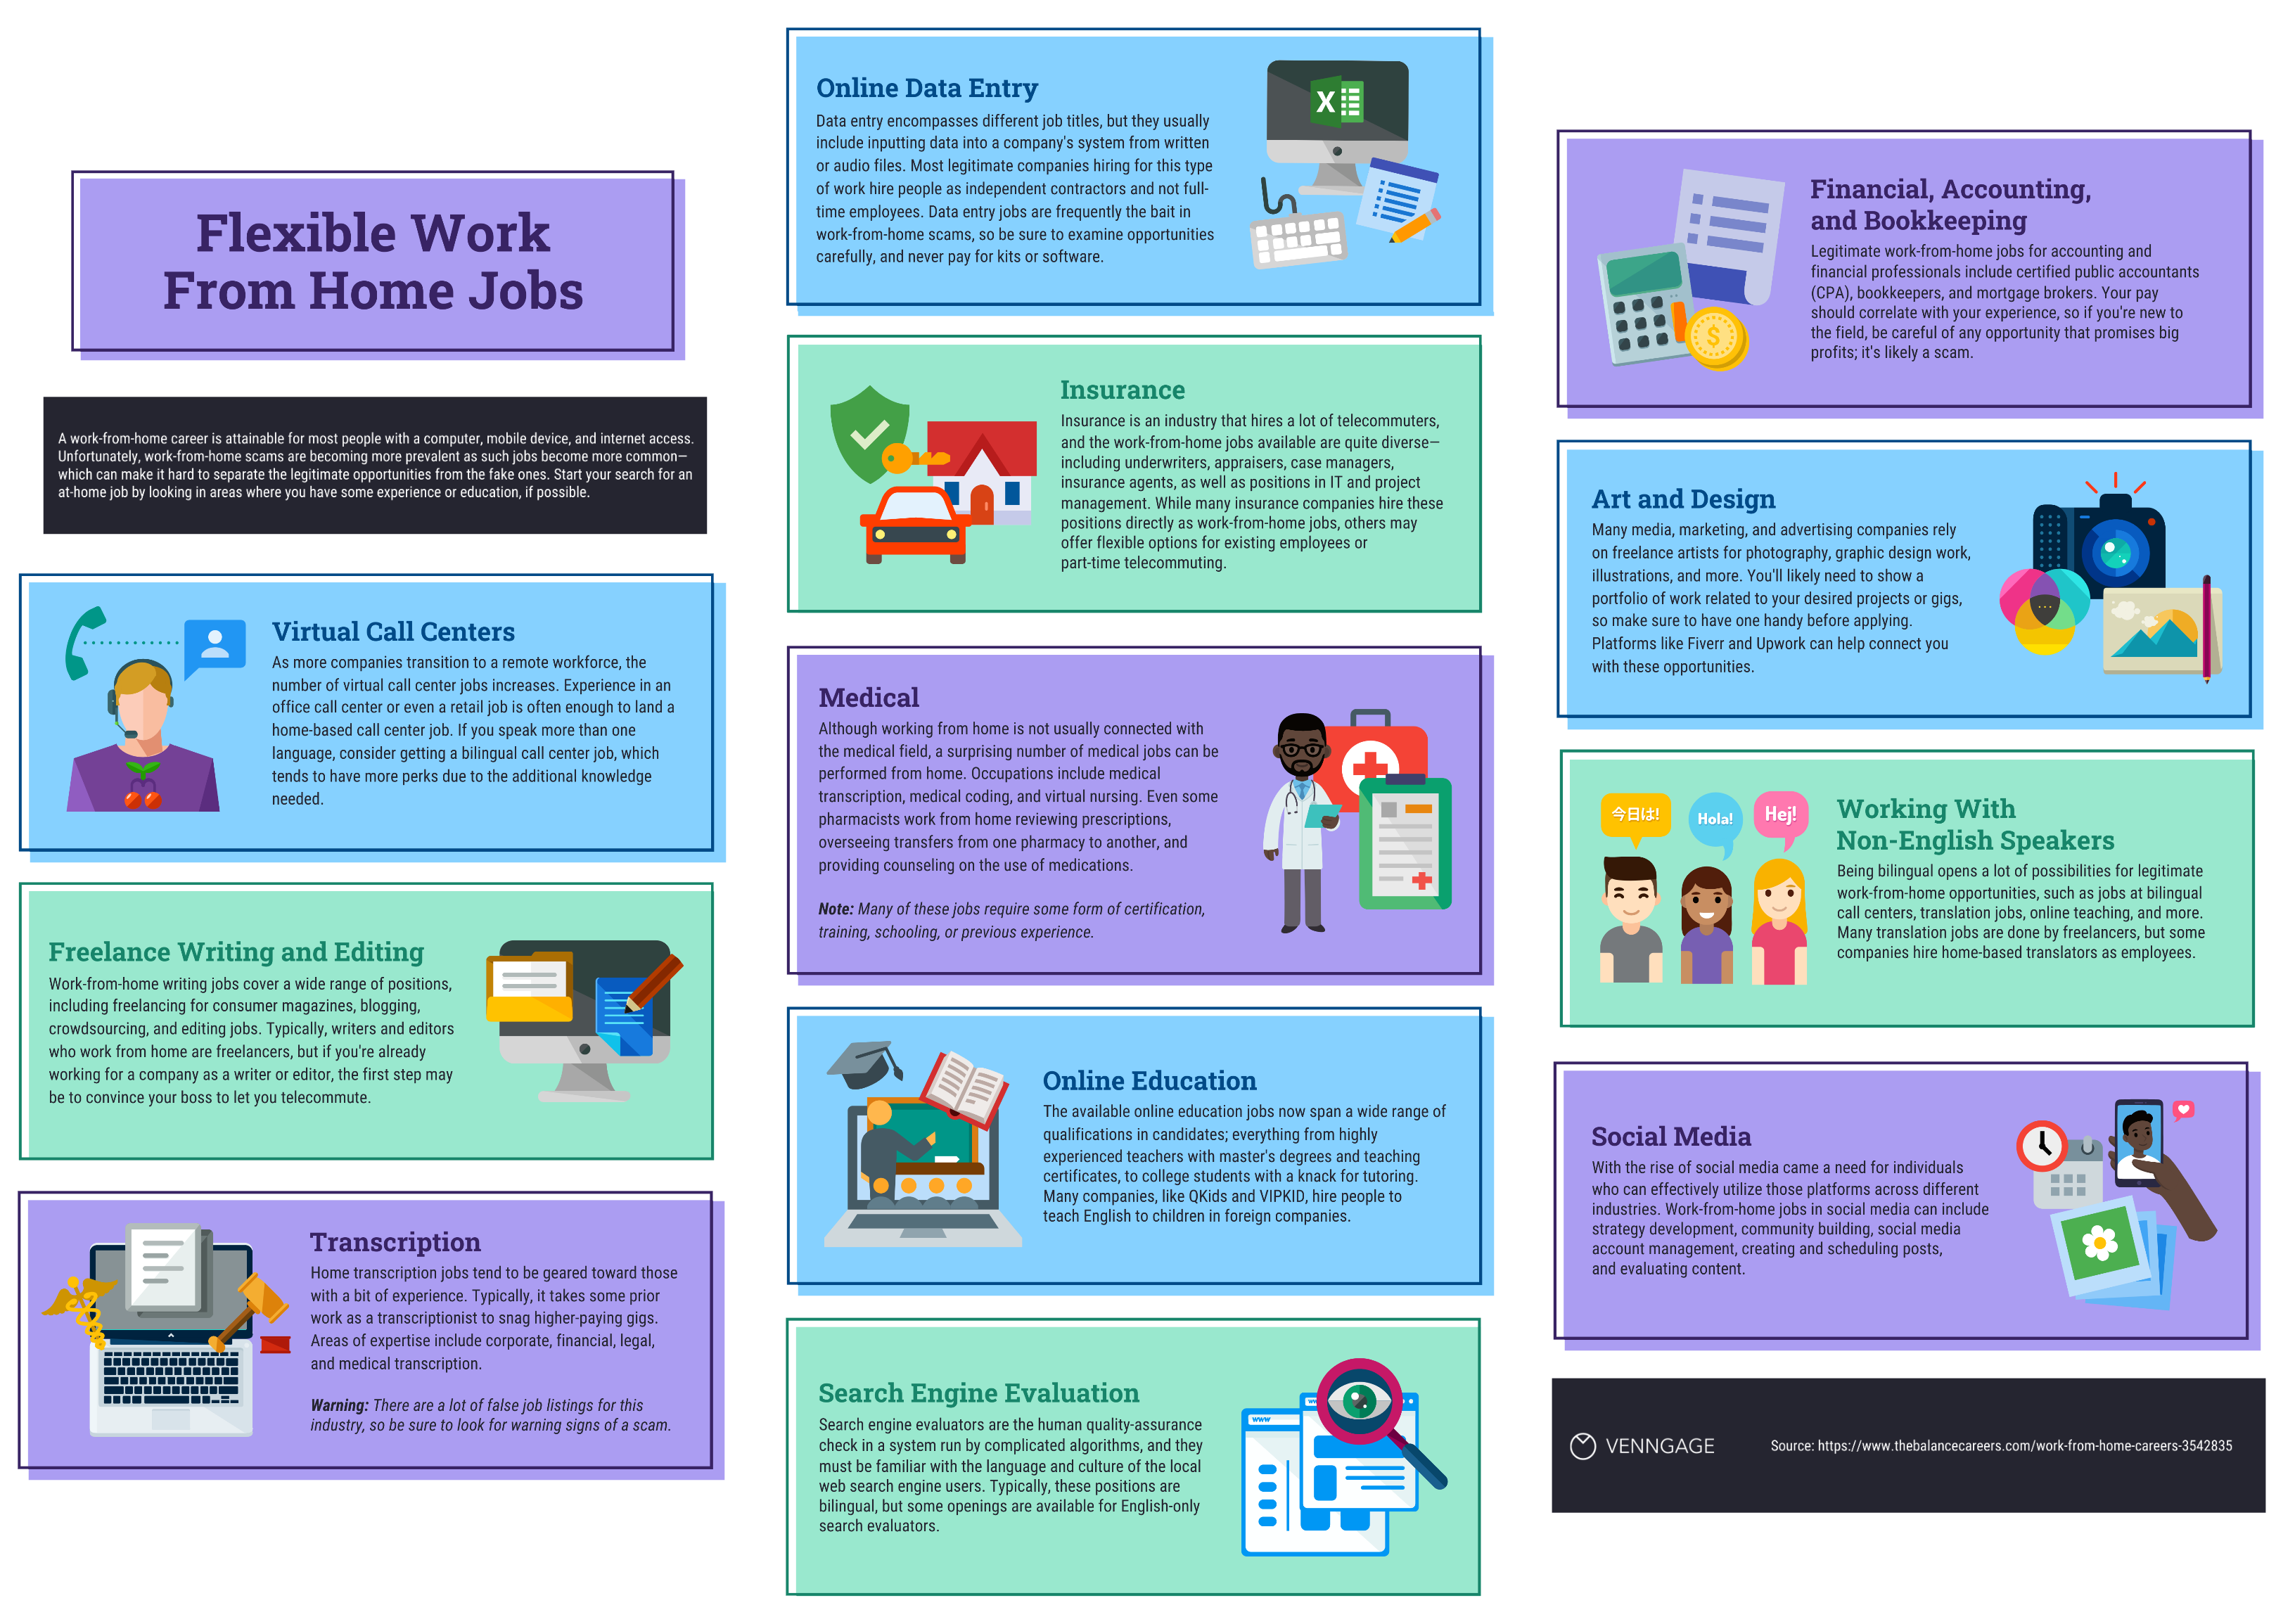 A blueprint-view of an infographic entitled 'Flexible Work From Home Jobs'. The main blocks of text in the infographic are navy blue, light blue, seafoam green, and purple. The icons in the infographic have many different colors.